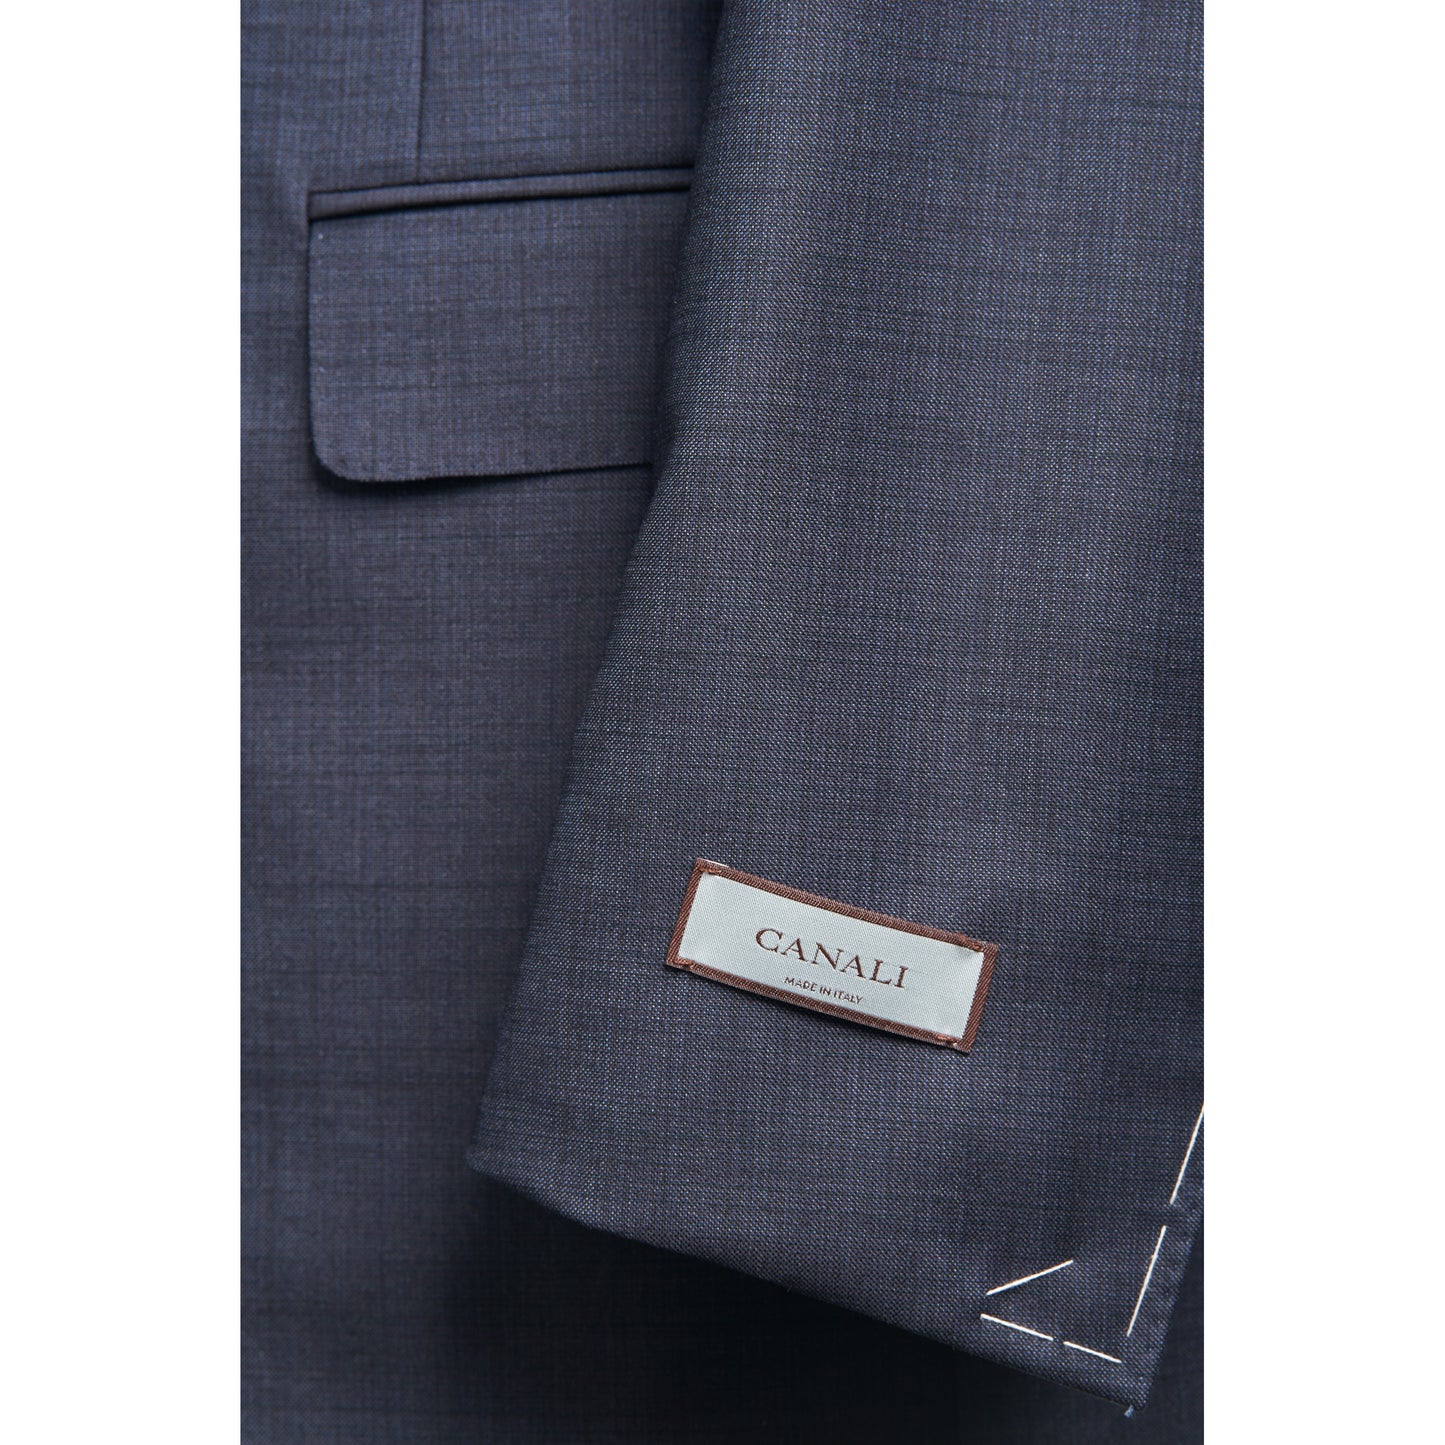 Canali Suit 100% Wool in Blue Grey